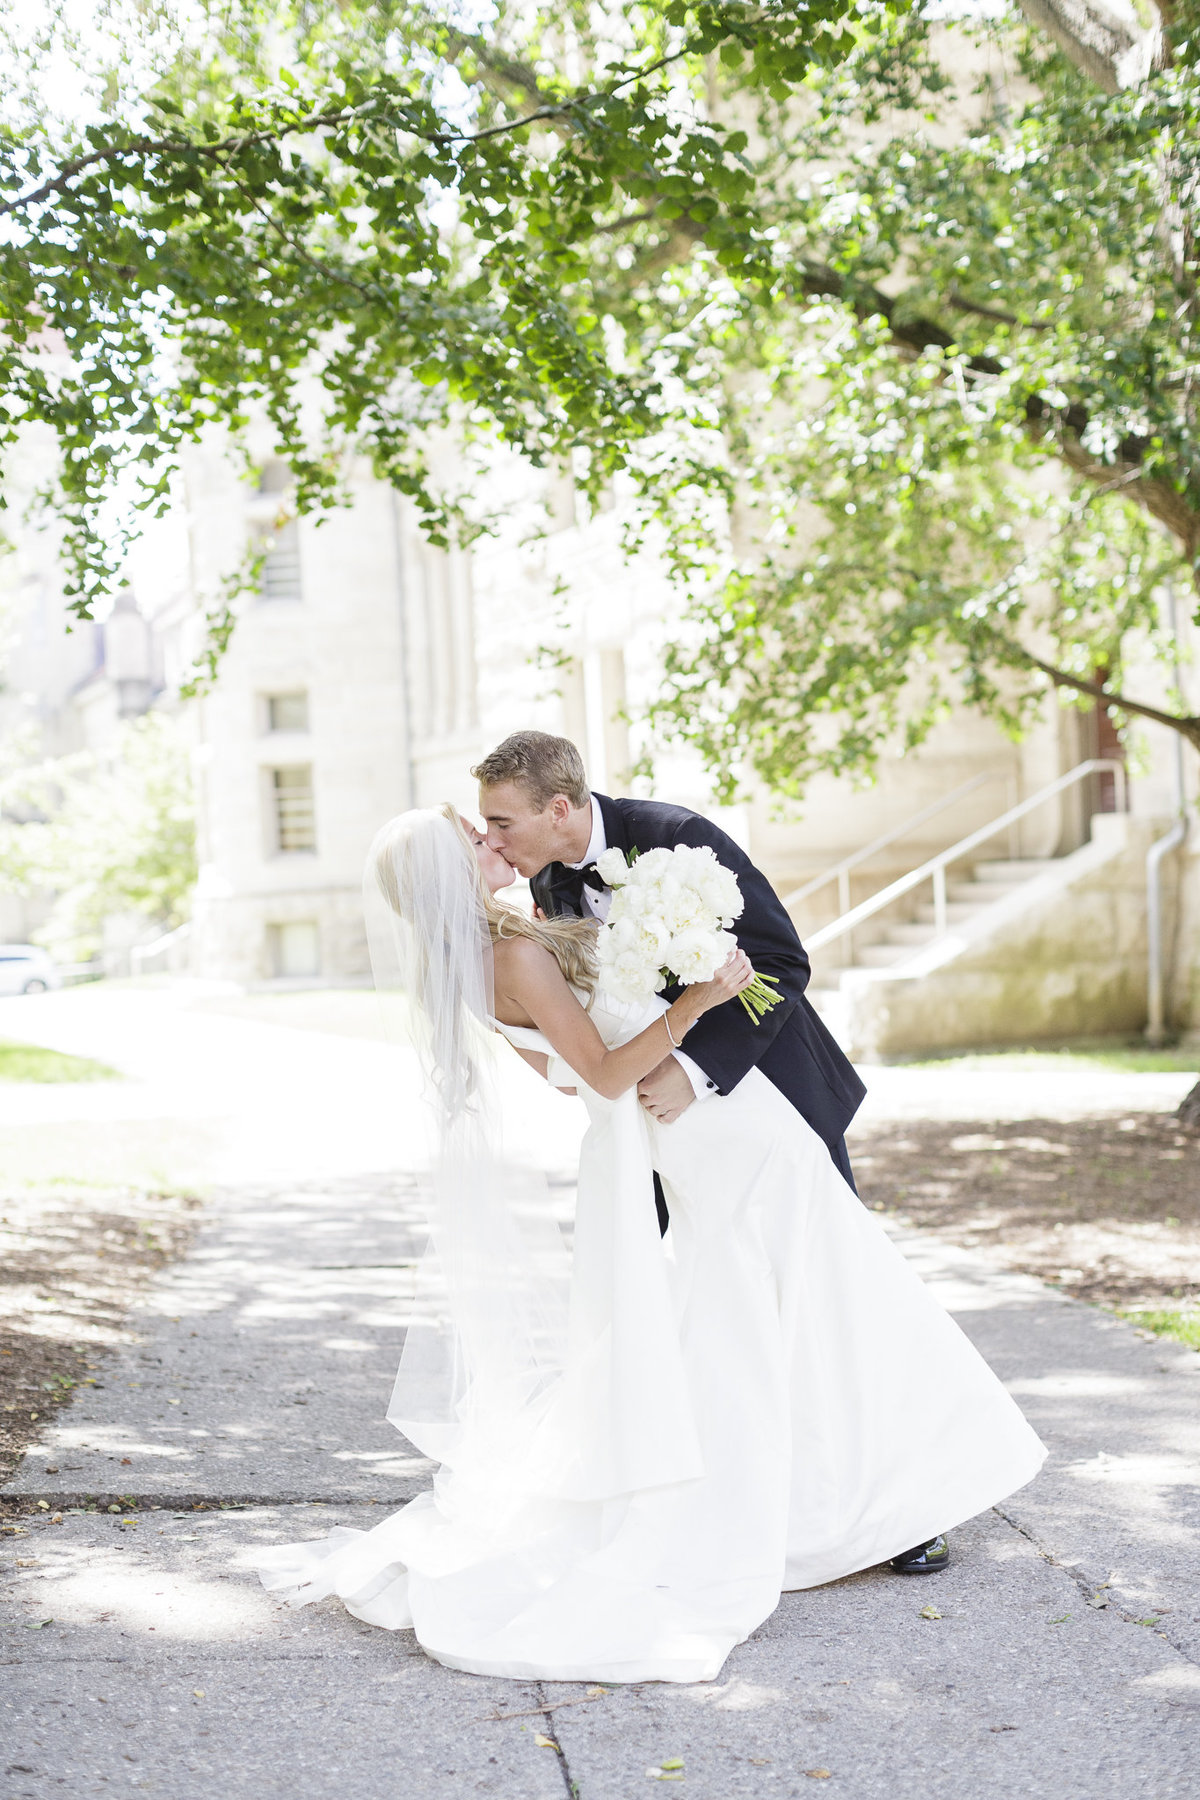 A wedding on the campus of Indiana University